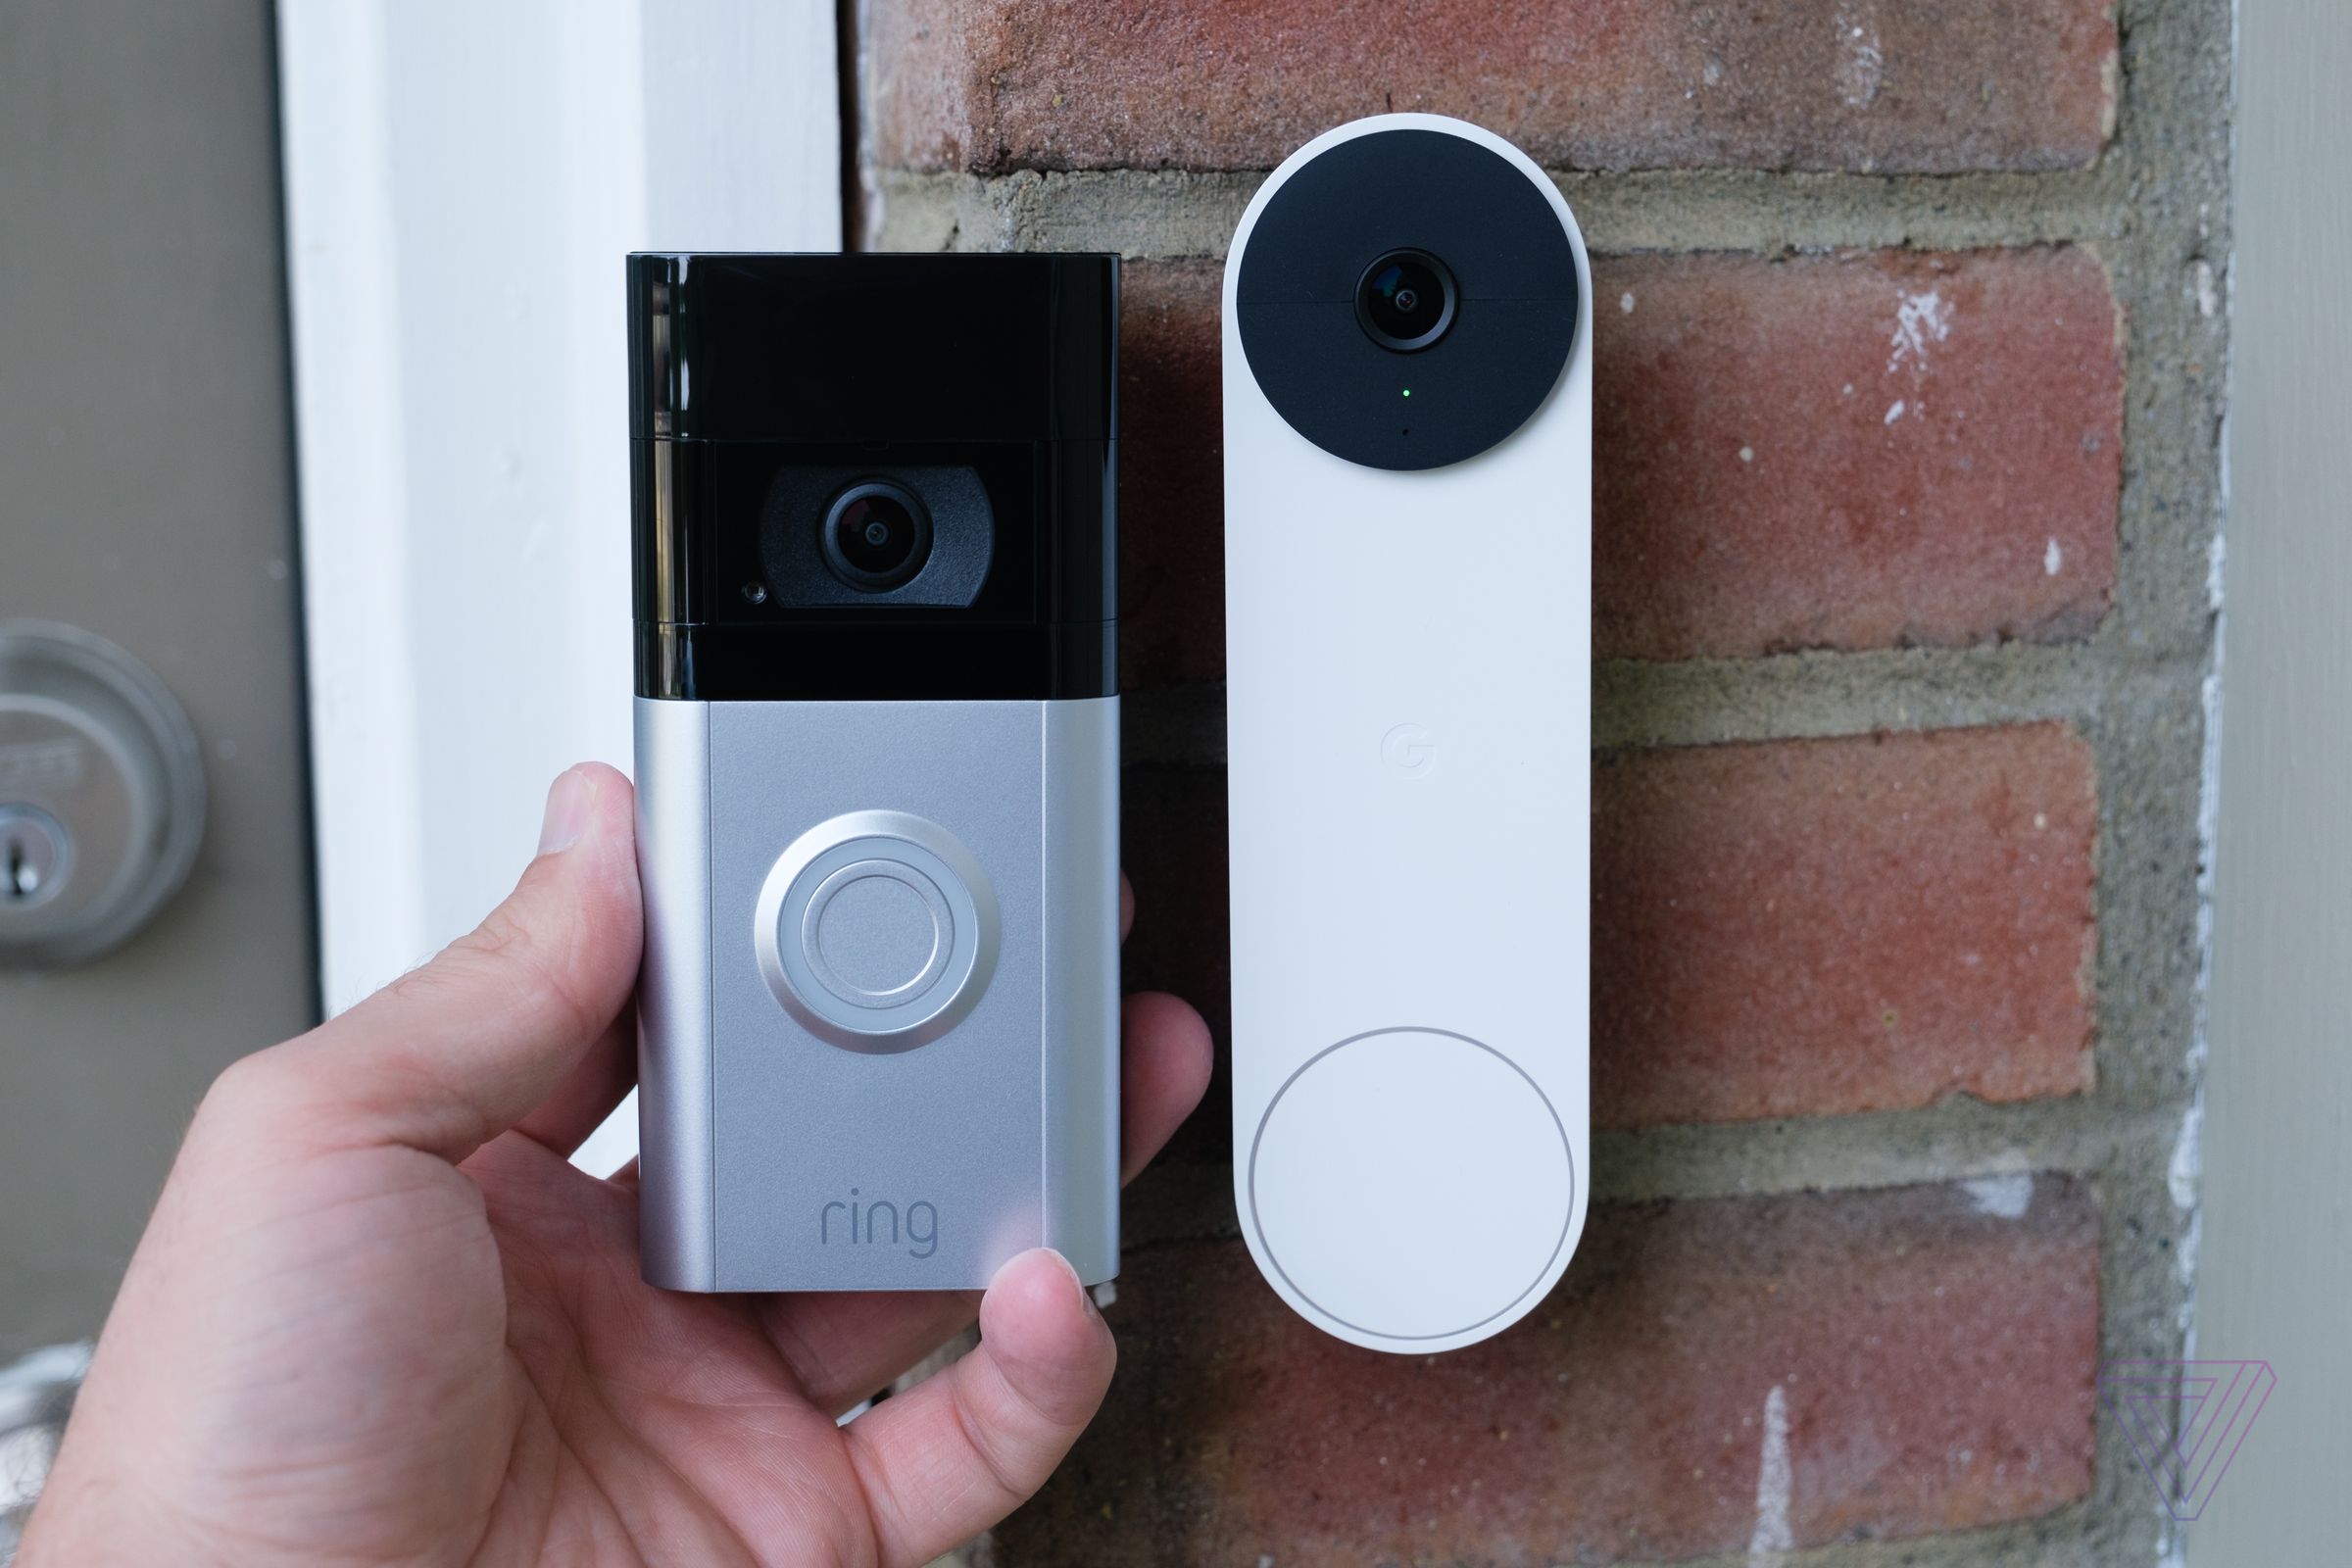 The Nest Doorbell is one of the largest video doorbells you can buy, taller than Ring’s Video Doorbell 4 (though slightly narrower).